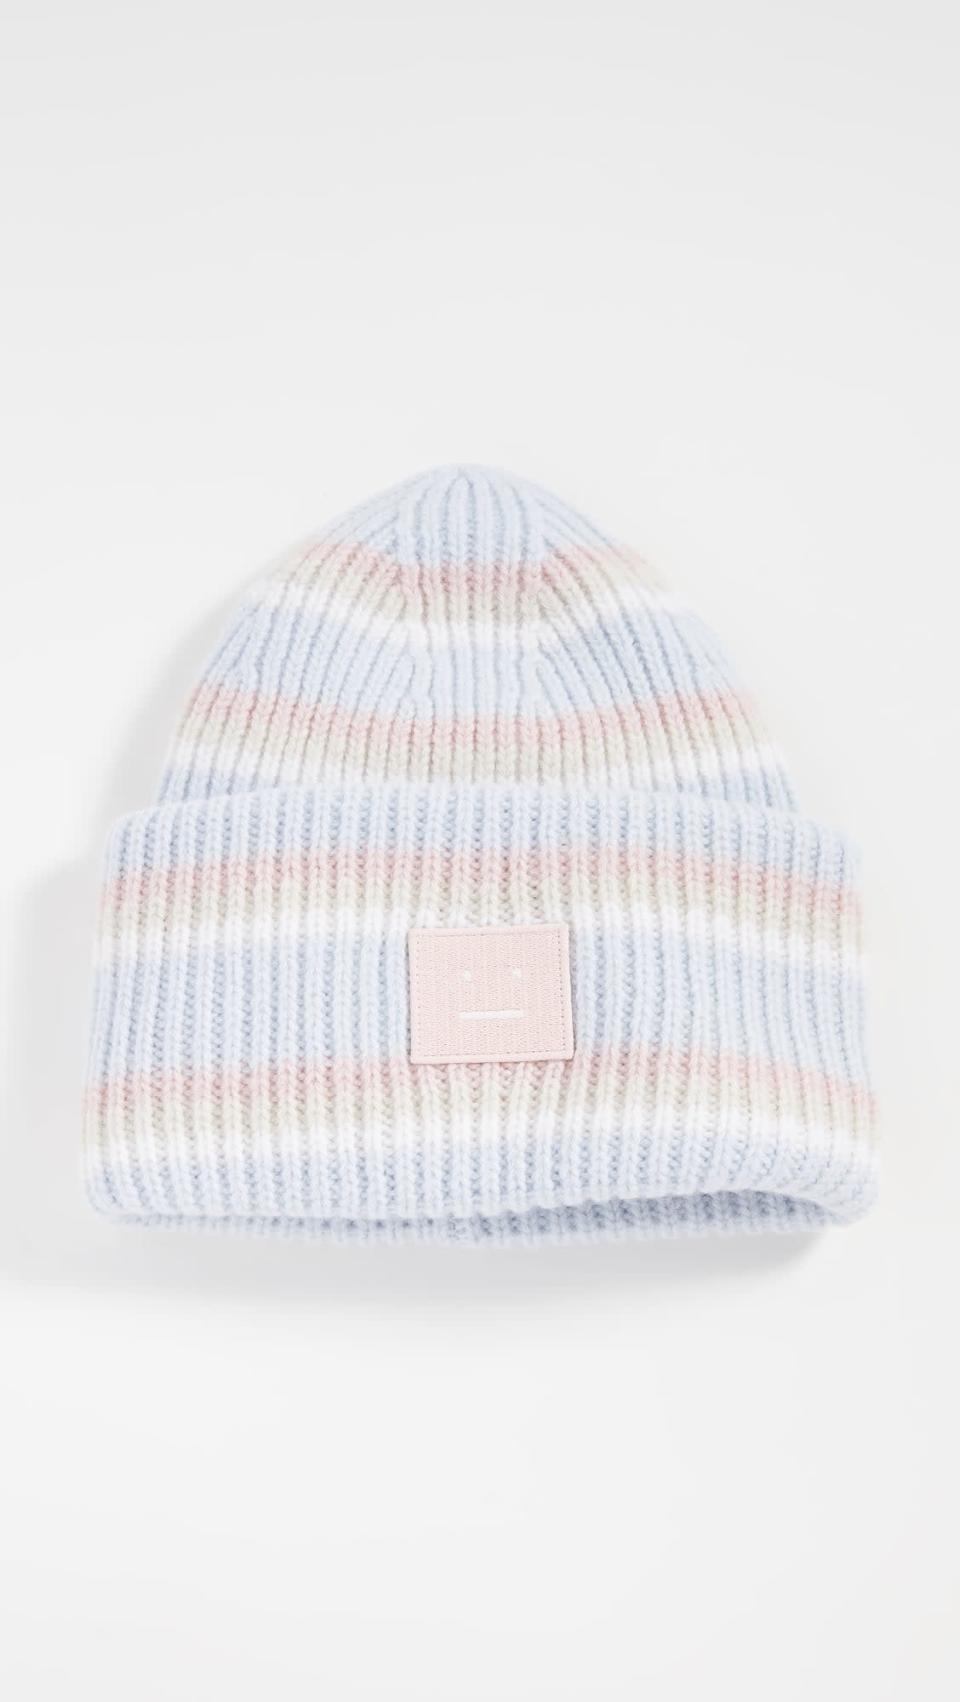 <p>They'll stay warm while looking cool in this <span>Acne Studios Multi Blue Beanie</span> ($180). We absolutely adore the colorful pattern.</p>